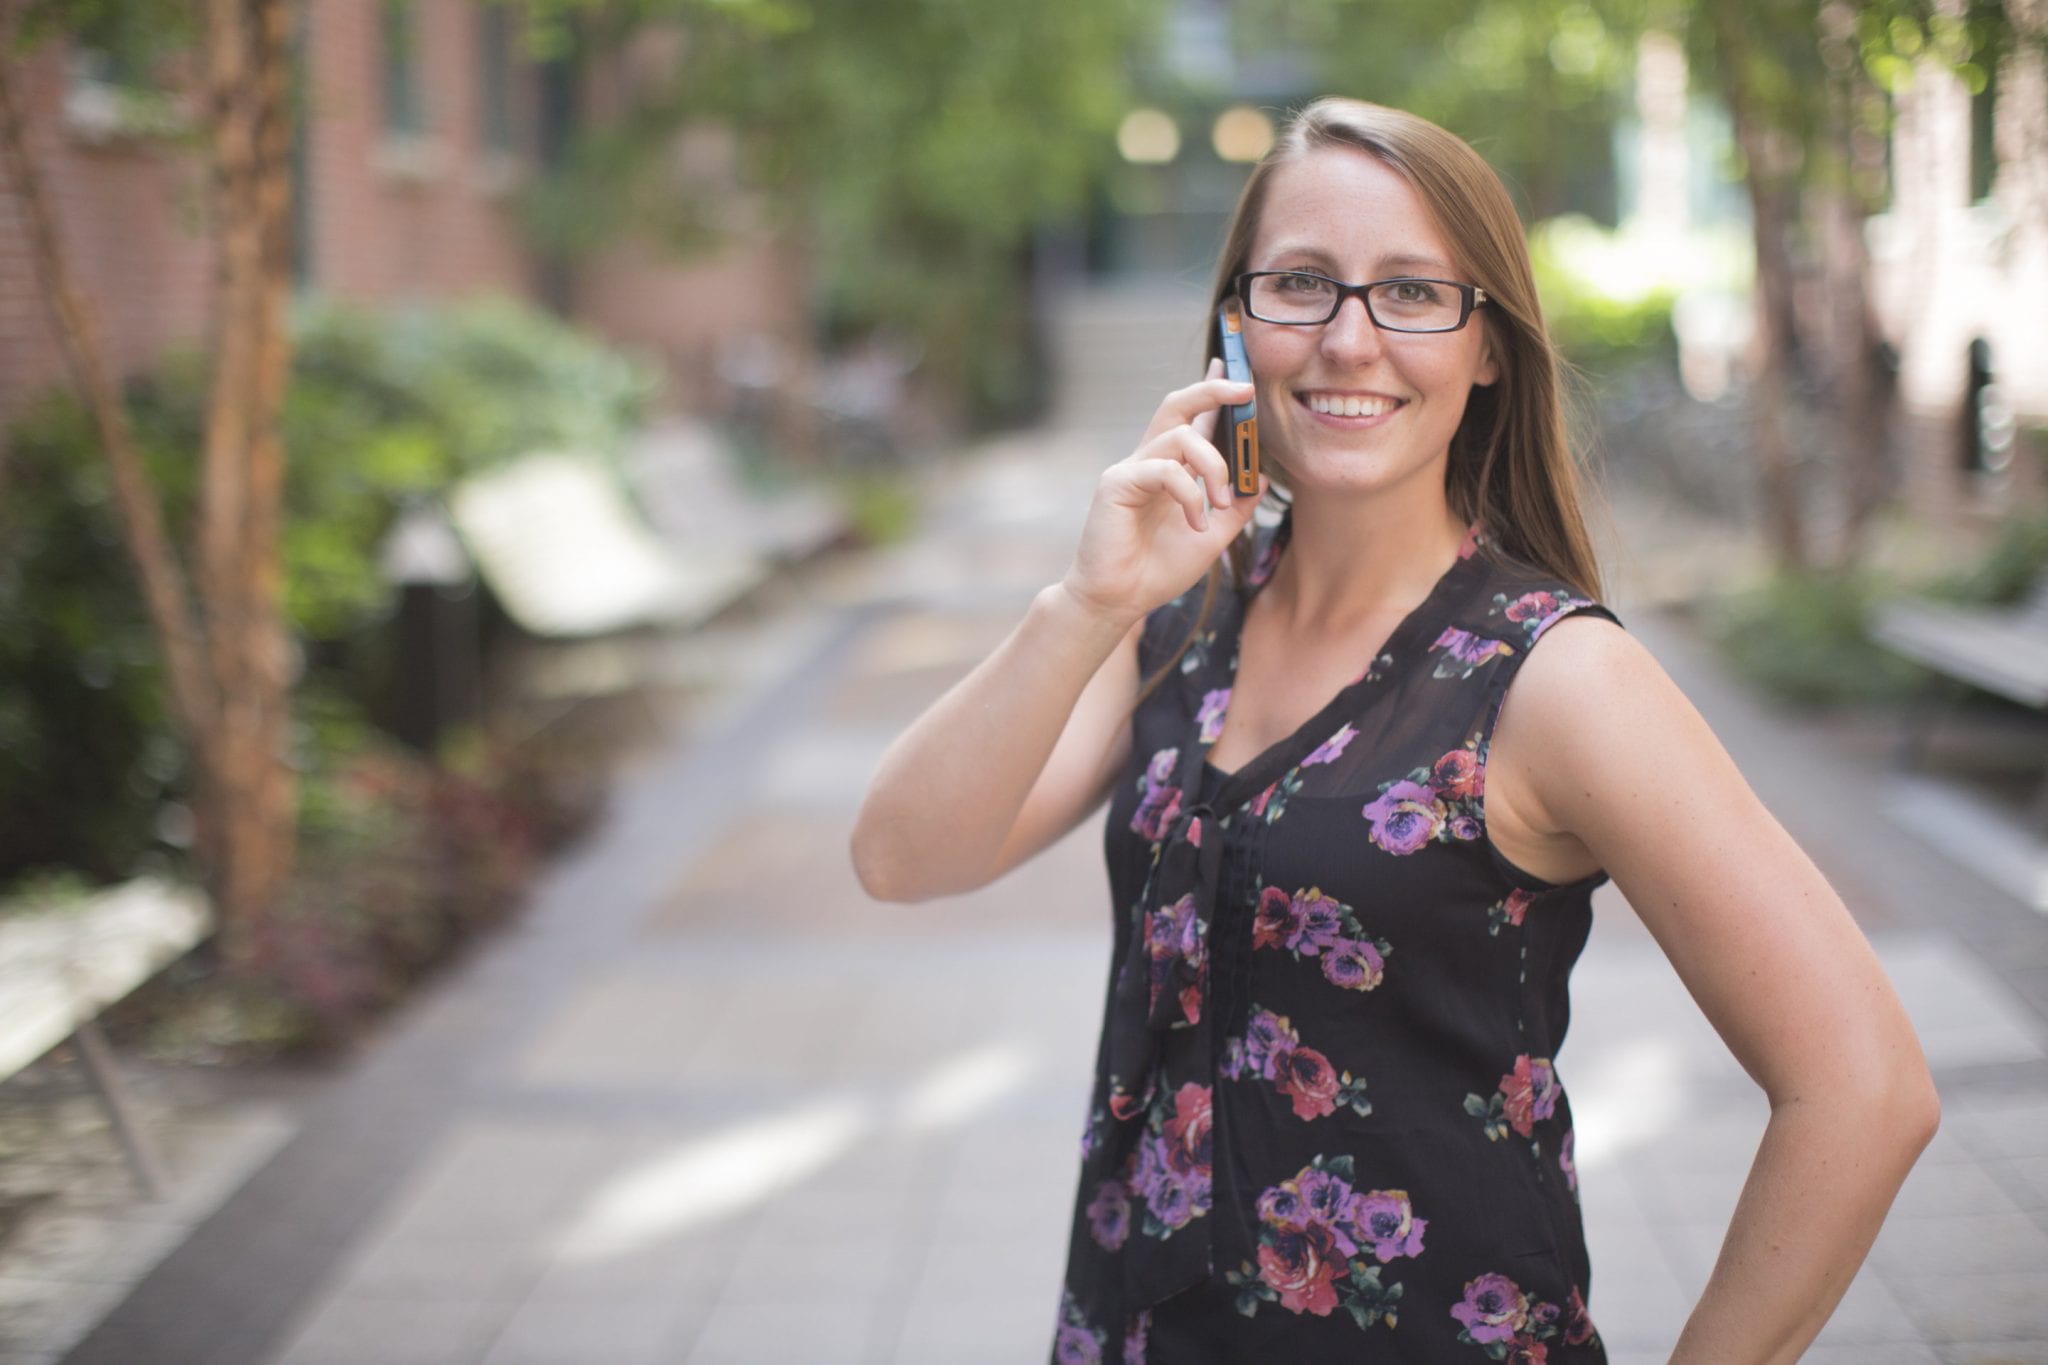 Image of a woman talking on the phone with an answering service